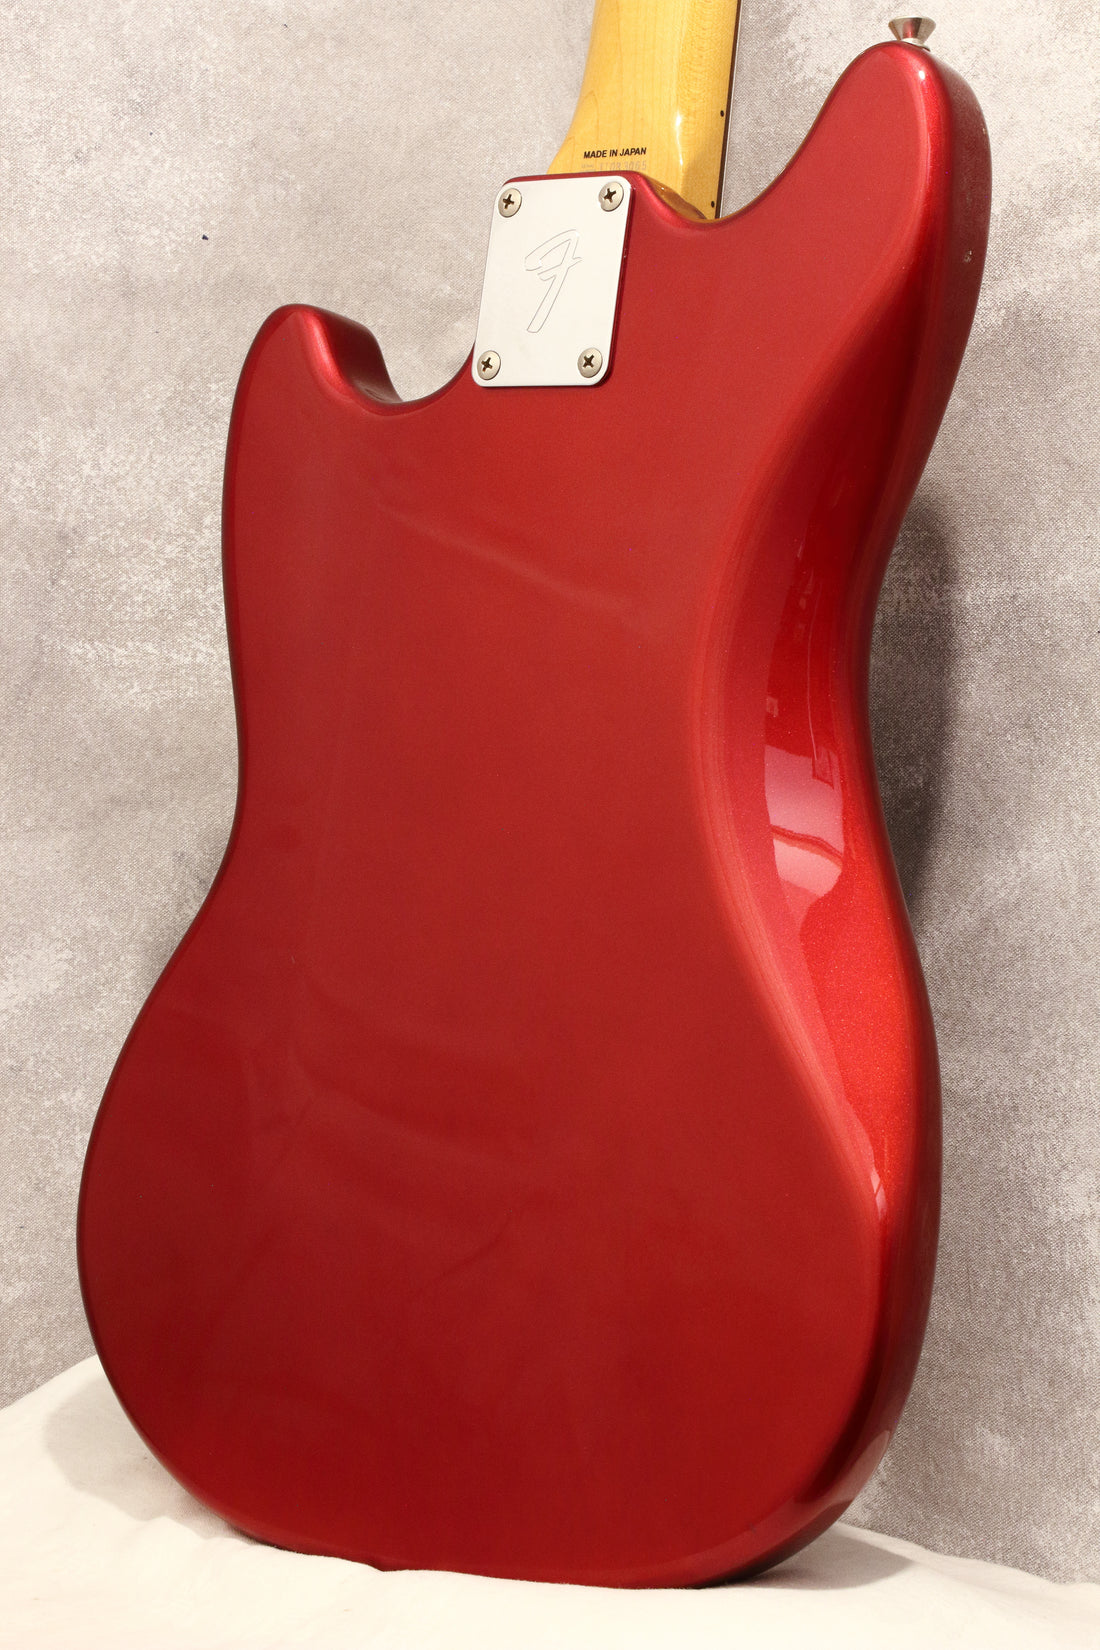 Fender Japan '69 Mustang MG69 Candy Apple Red 2010